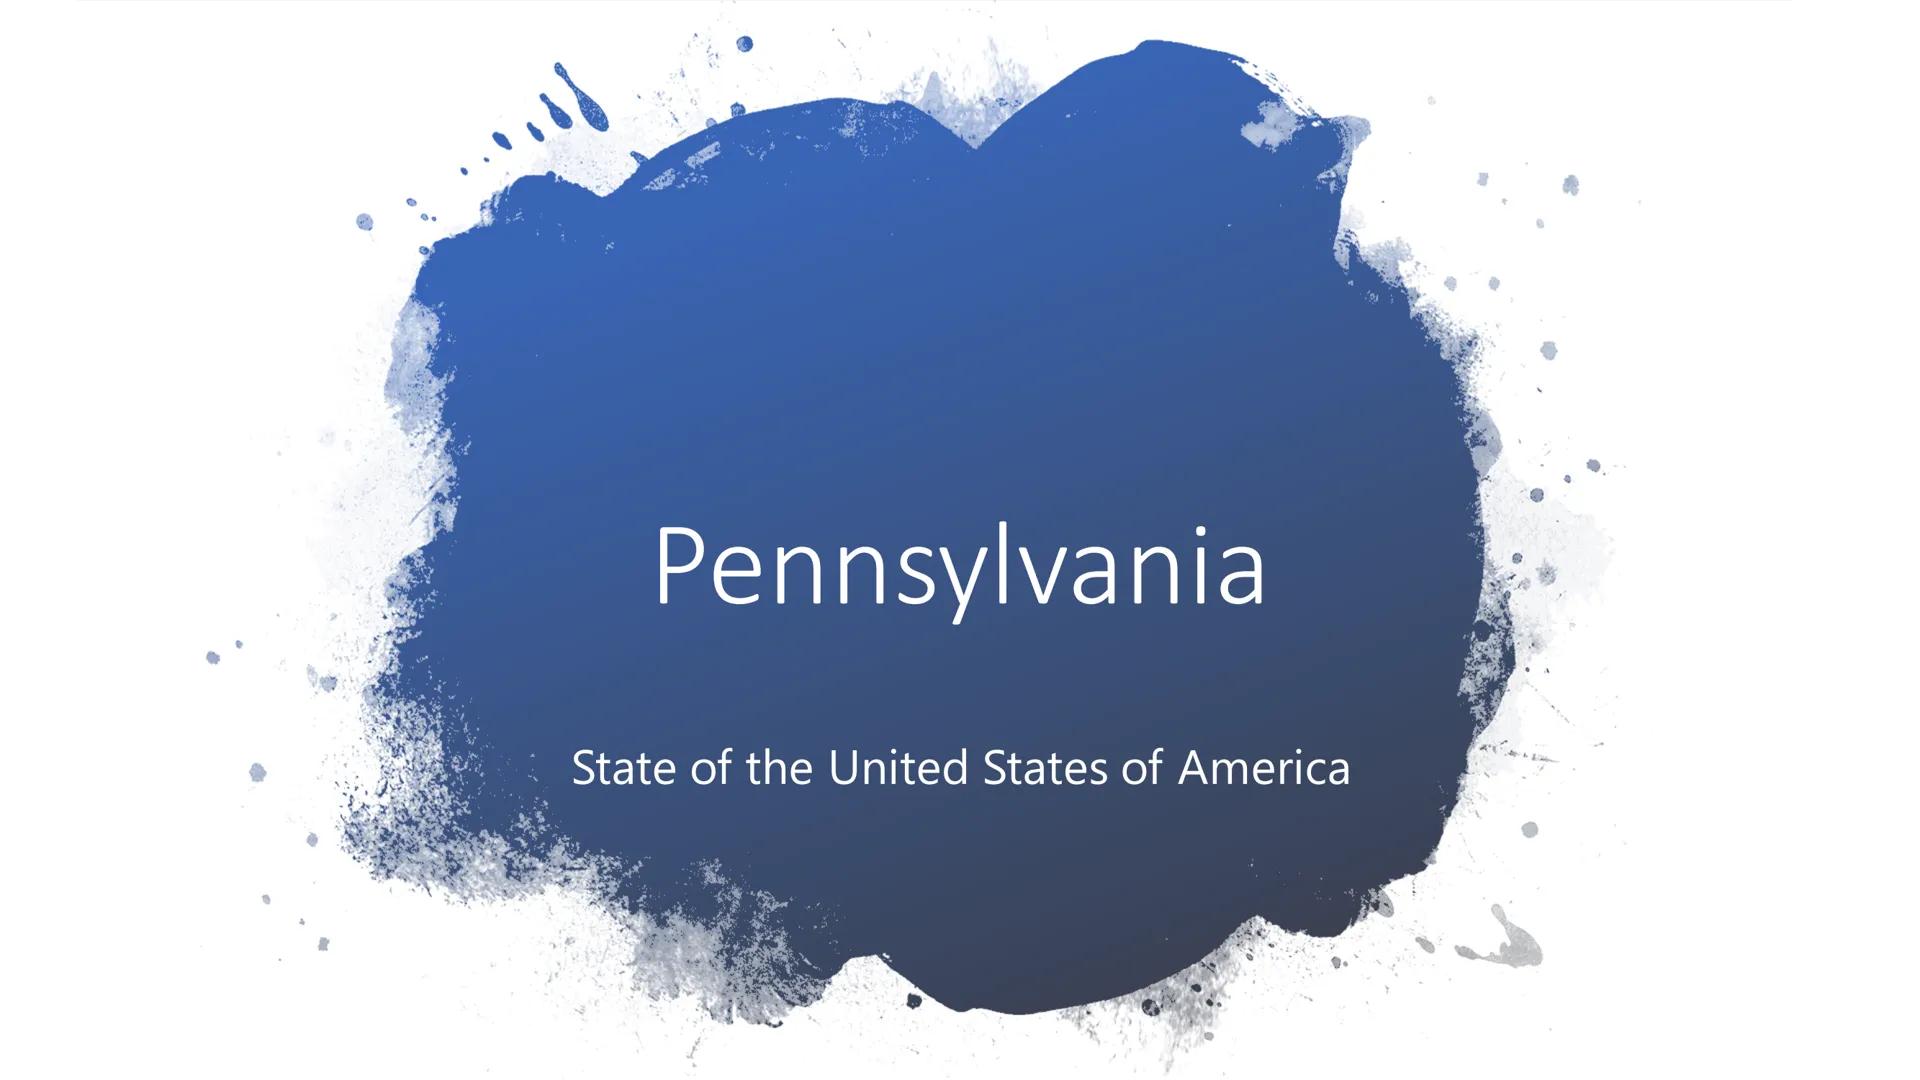 Pennsylvania
State of the United States of America ●
●
●
General information
Geography
Capitol
Highlights
Sources
Content General informatio